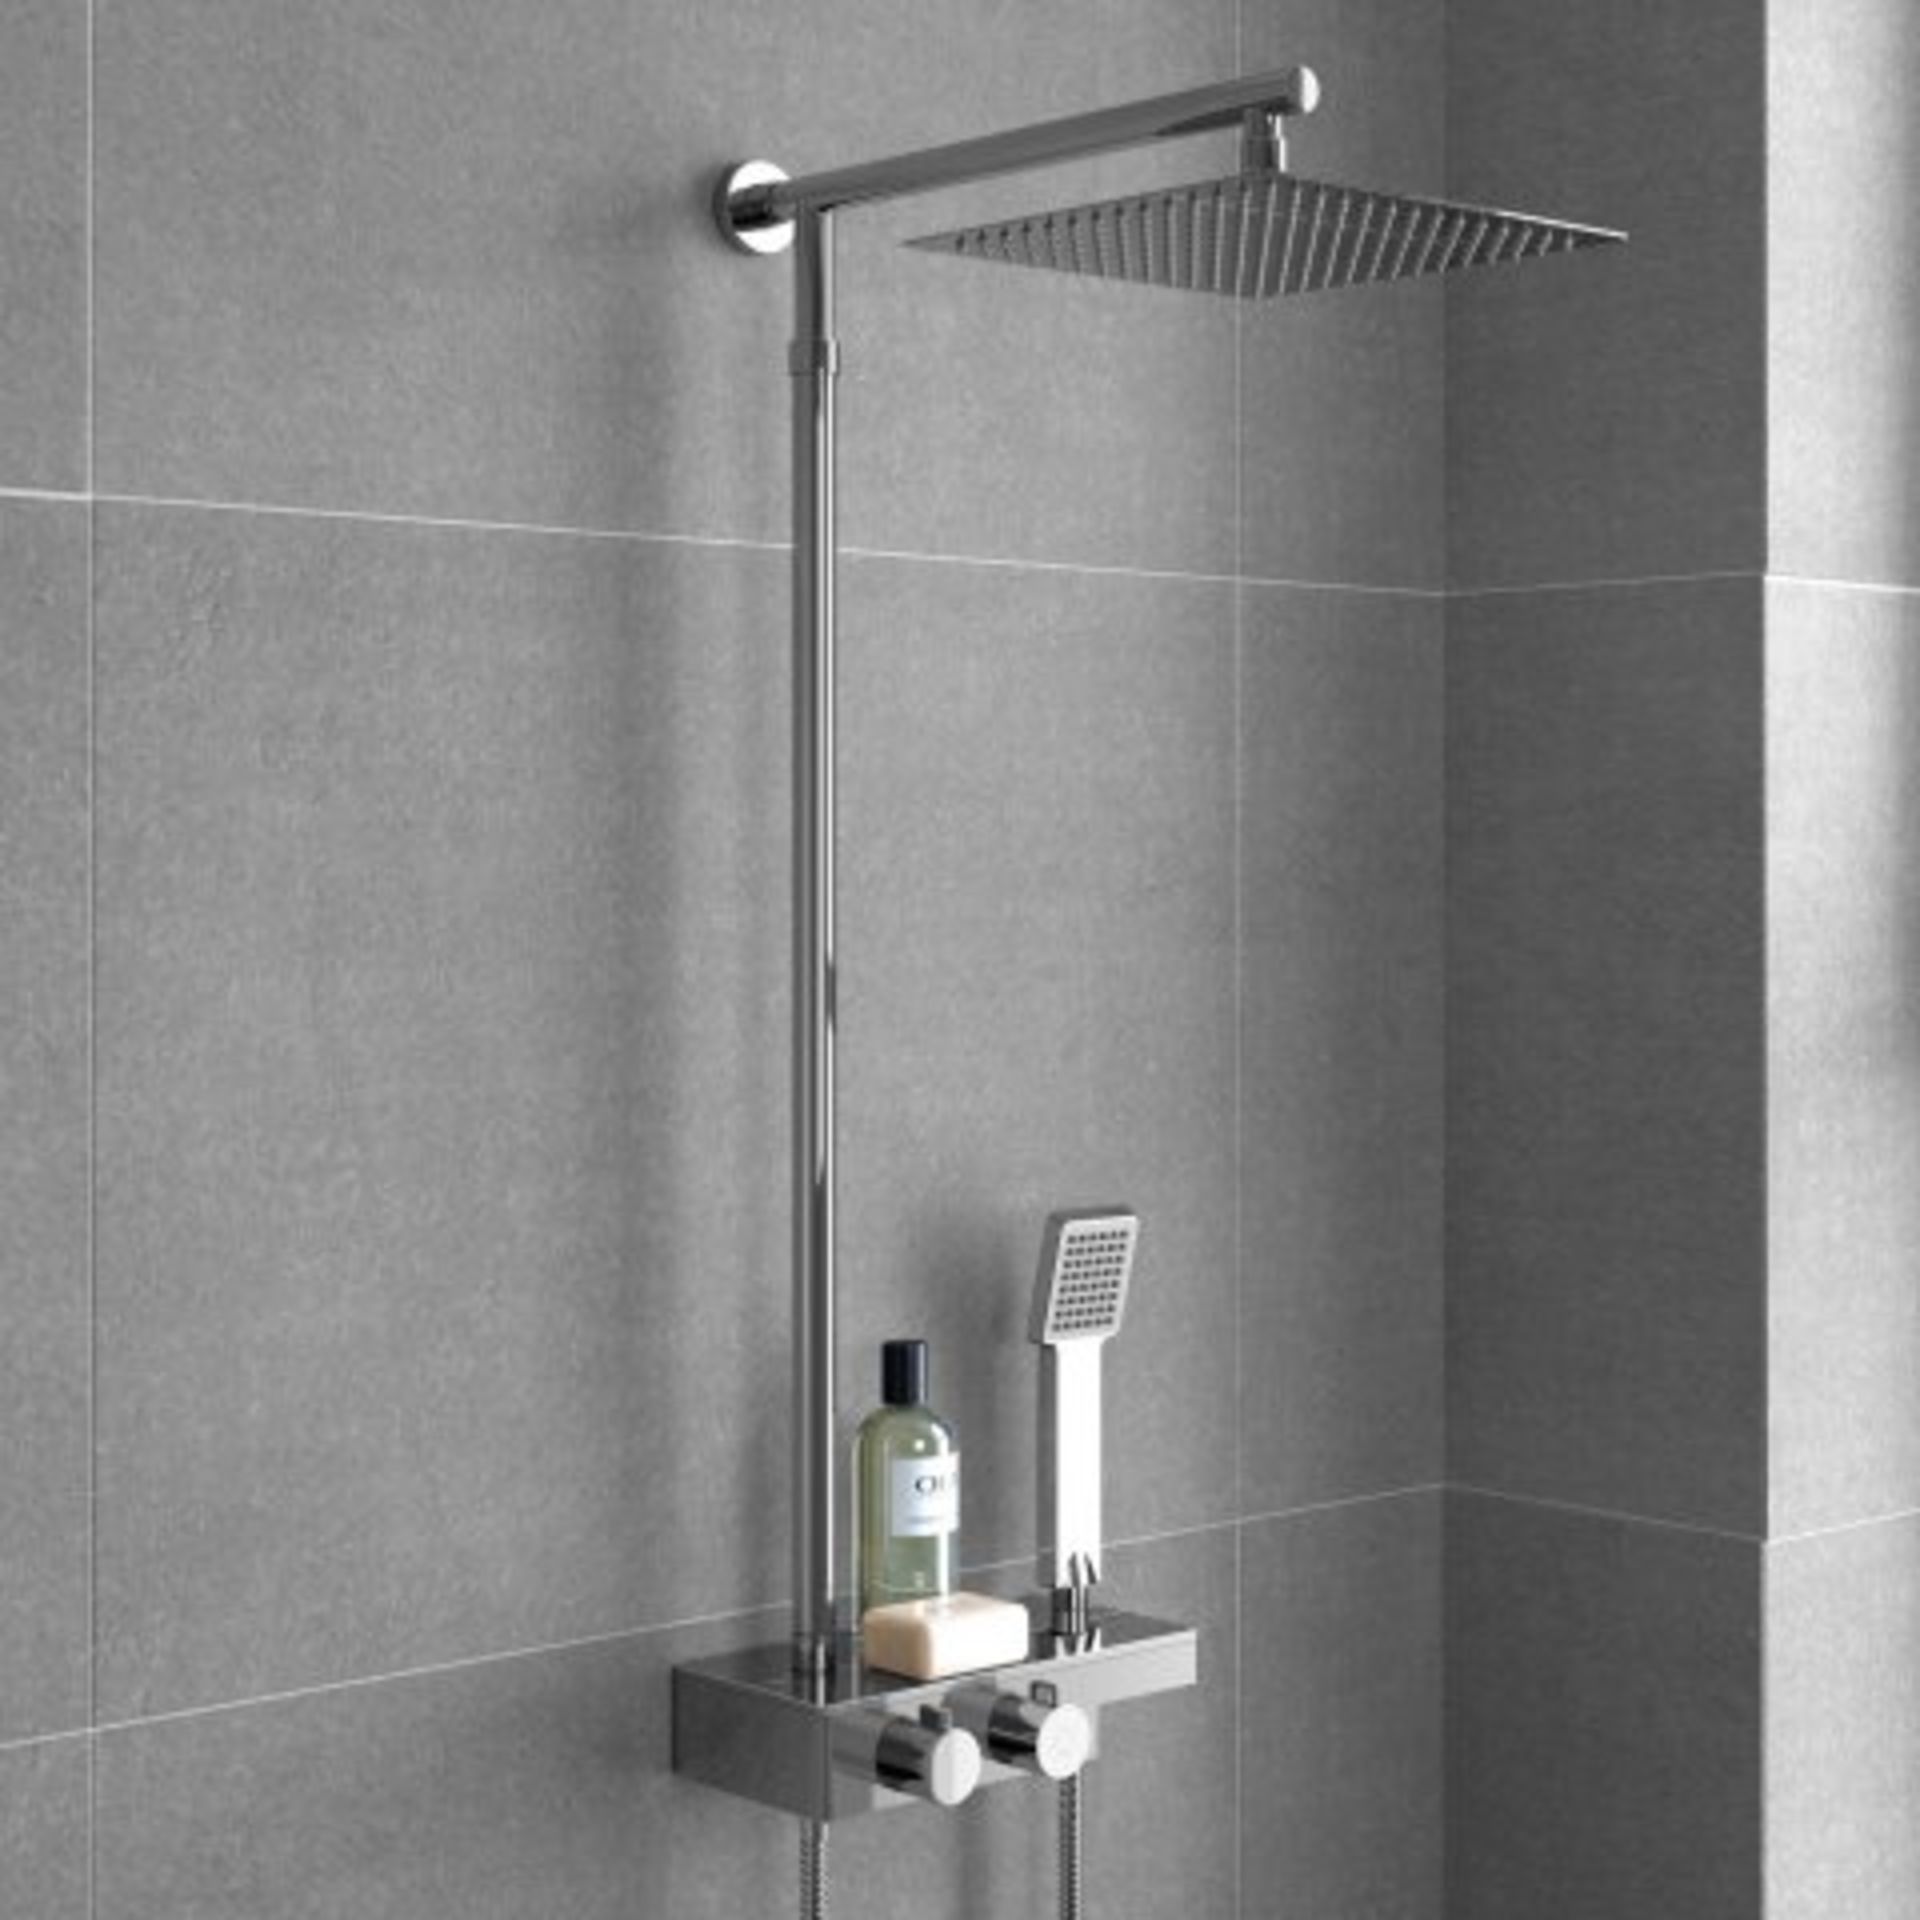 (O39) 250mm Large Square Head Thermostatic Exposed Shower Kit, Handheld & Storage Shelf. RRP £349. - Image 2 of 5